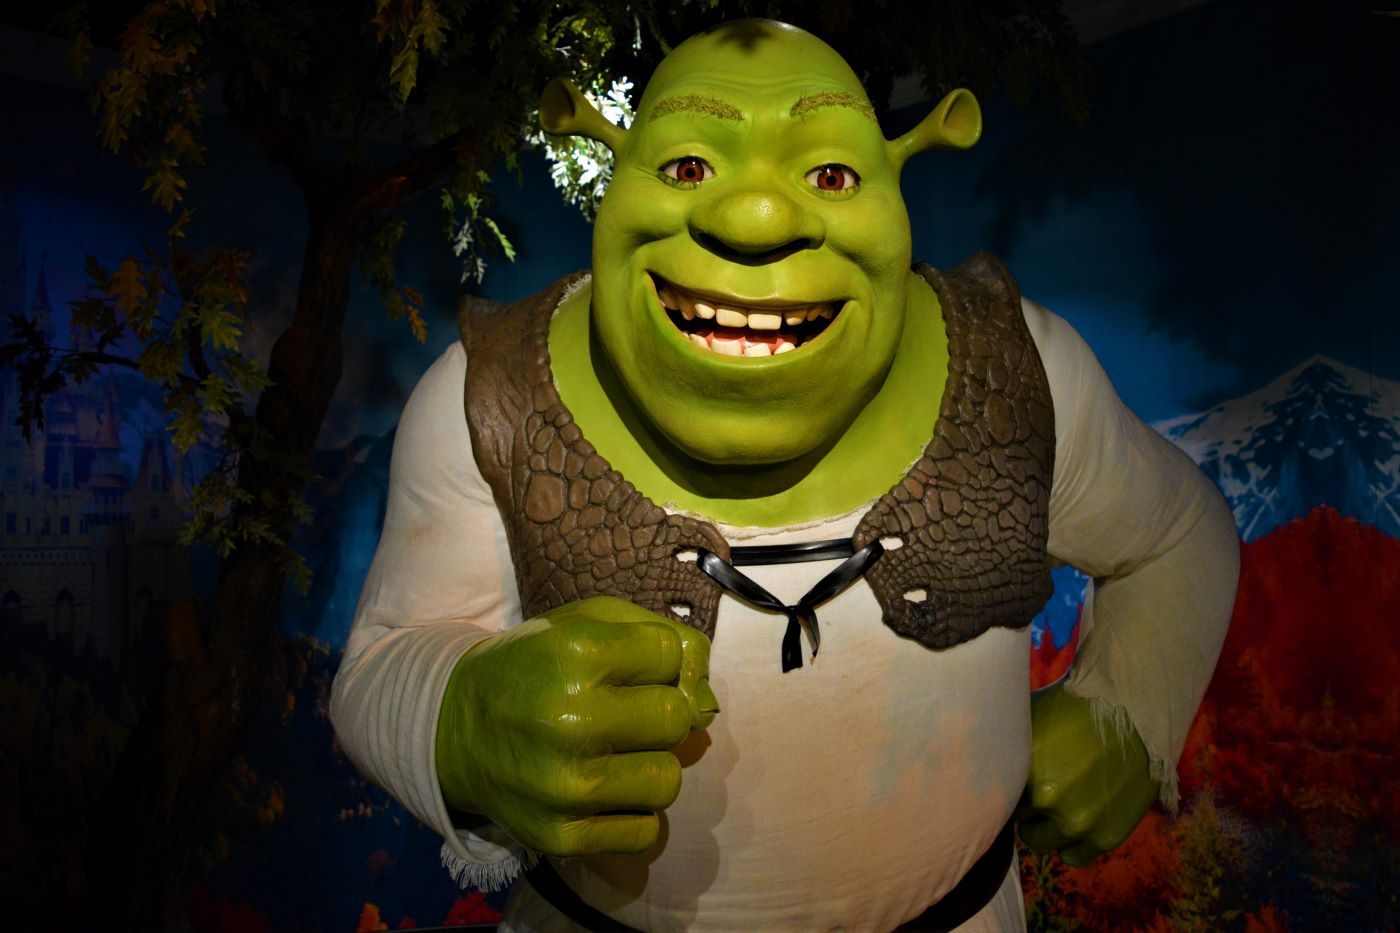 Shrek, the character, stands in front of a wooded scene.